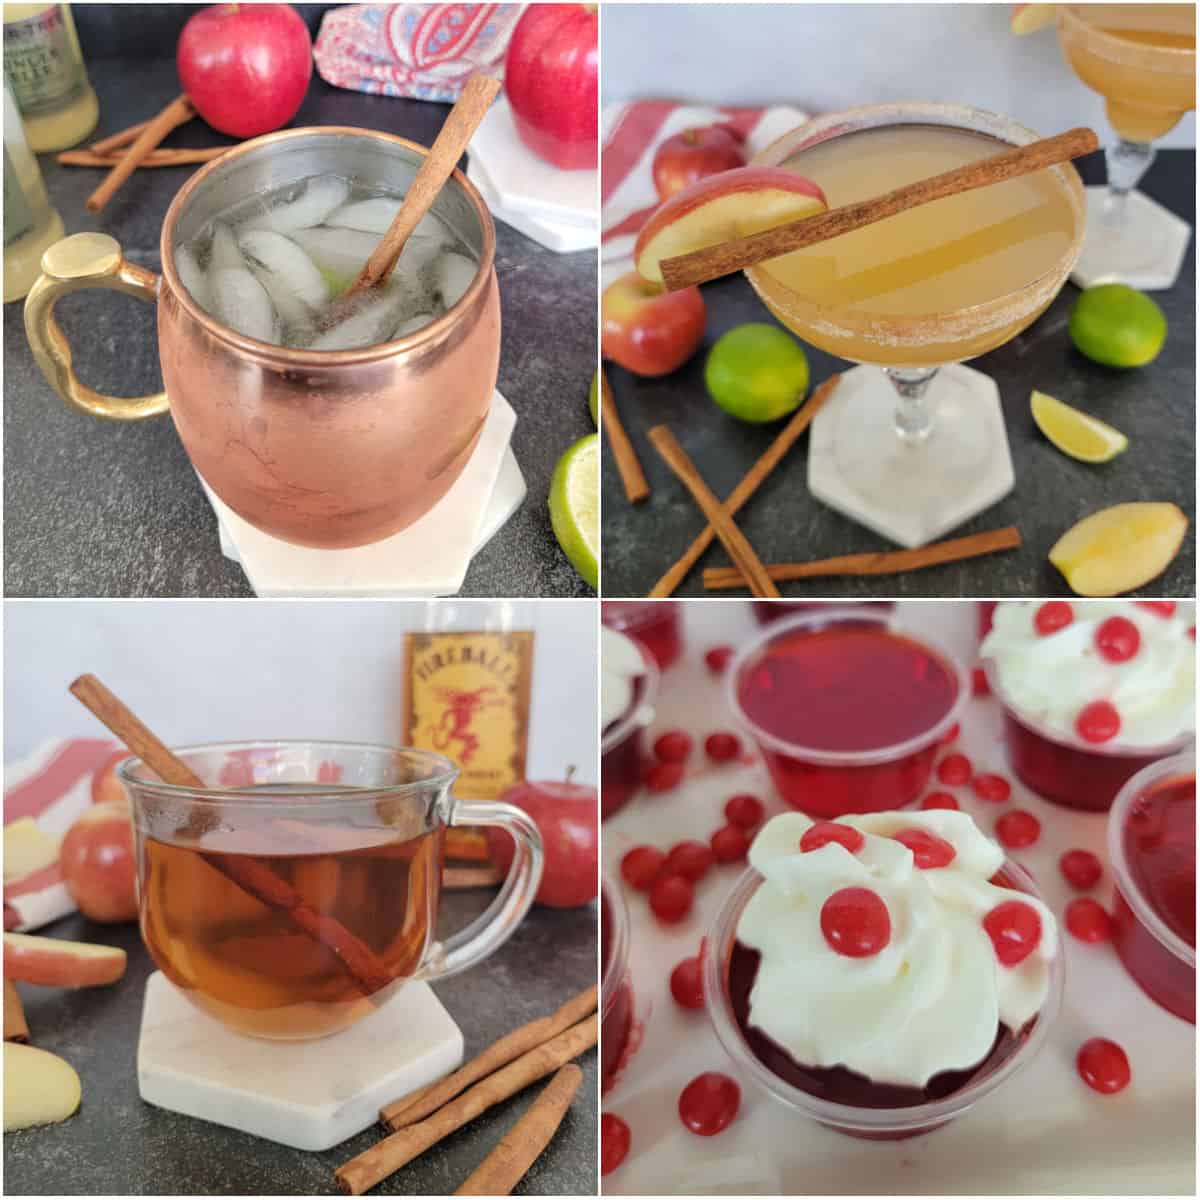 Collage of Fall Cocktails including apple cider mule, margarita, fireball apple cider, and fireball jello shots